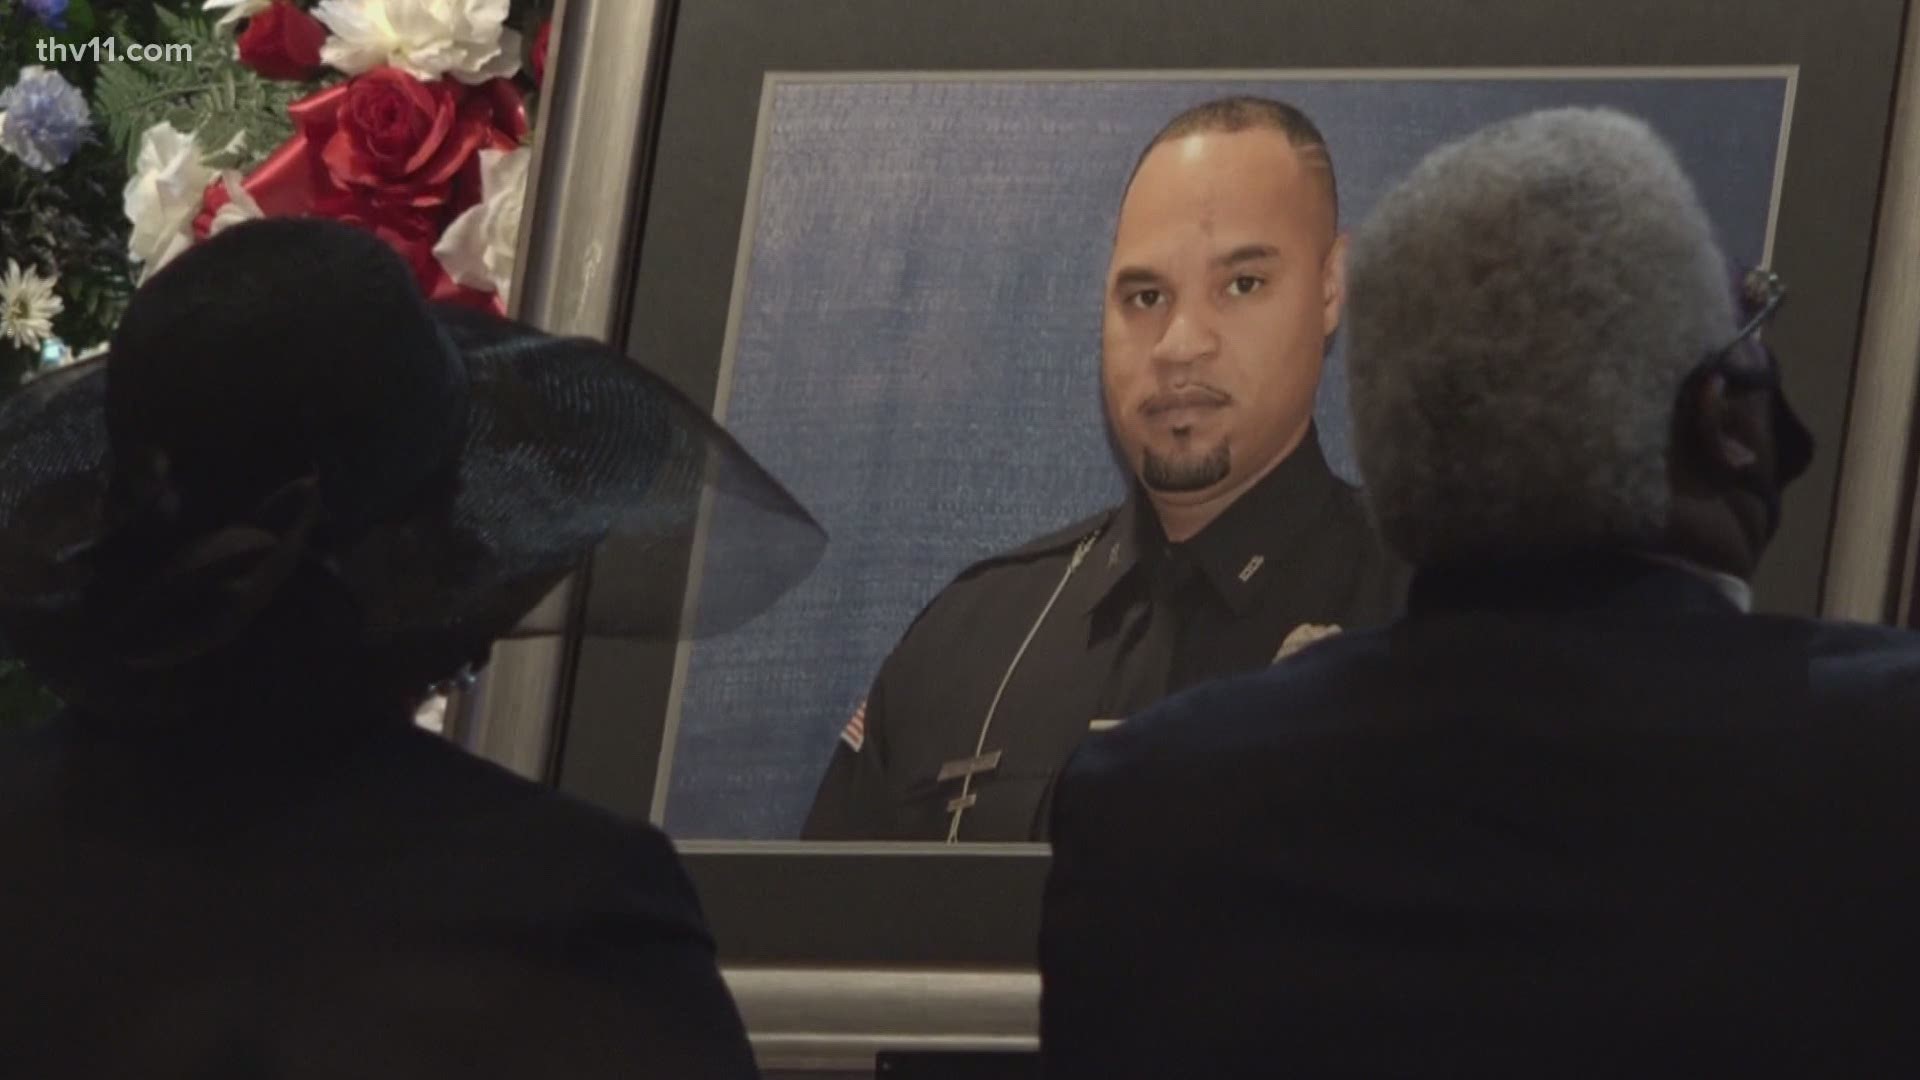 Hundreds gathered Saturday to remember the life of Detective Kevin Collins, who was shot and killed in the line of duty.